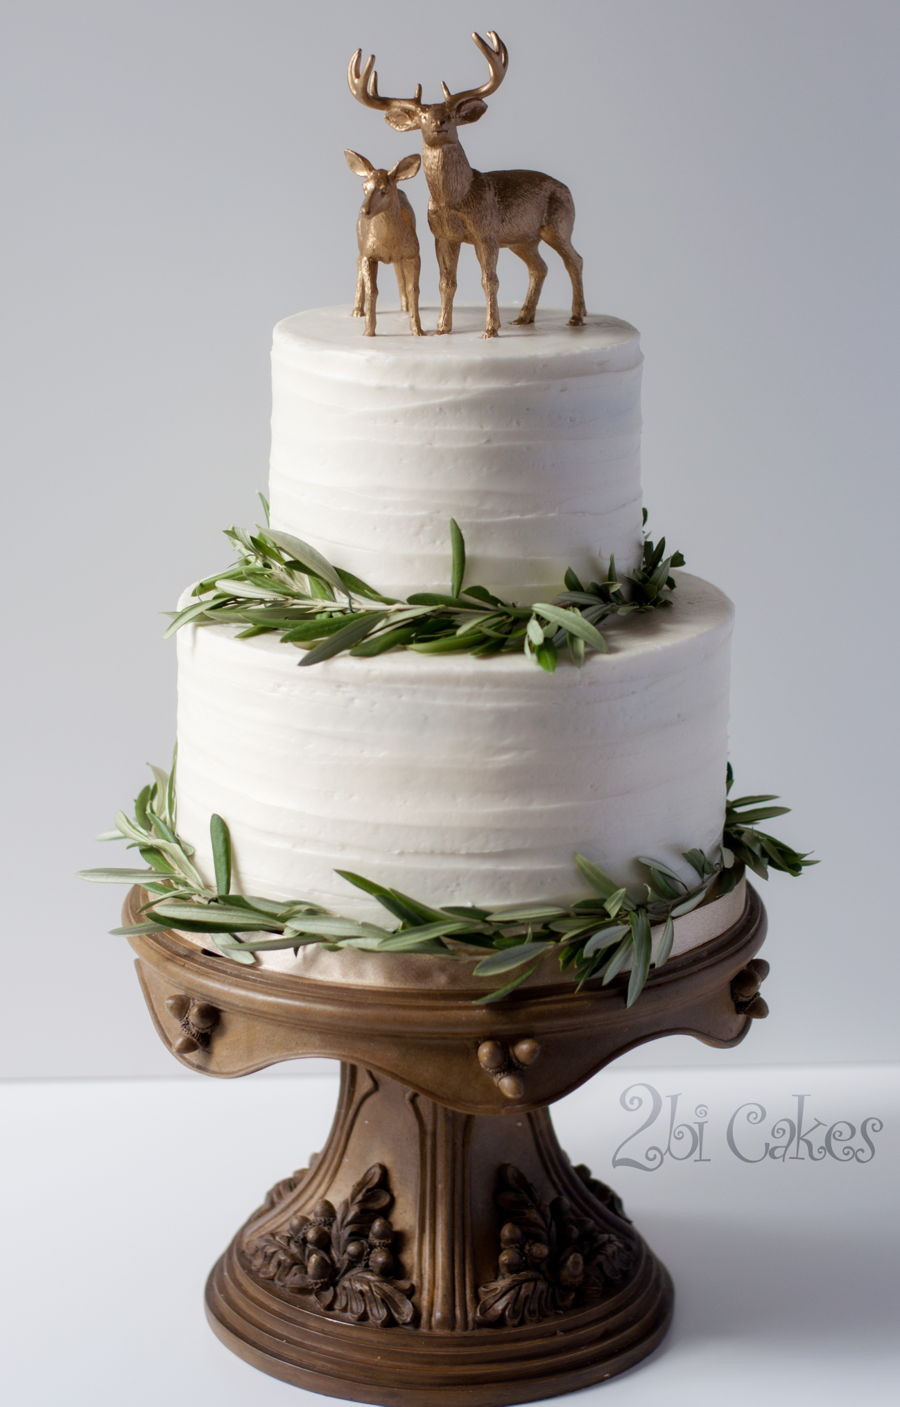 Woodsy Wedding Cakes
 Rustic Woodsy Wedding Cake CakeCentral